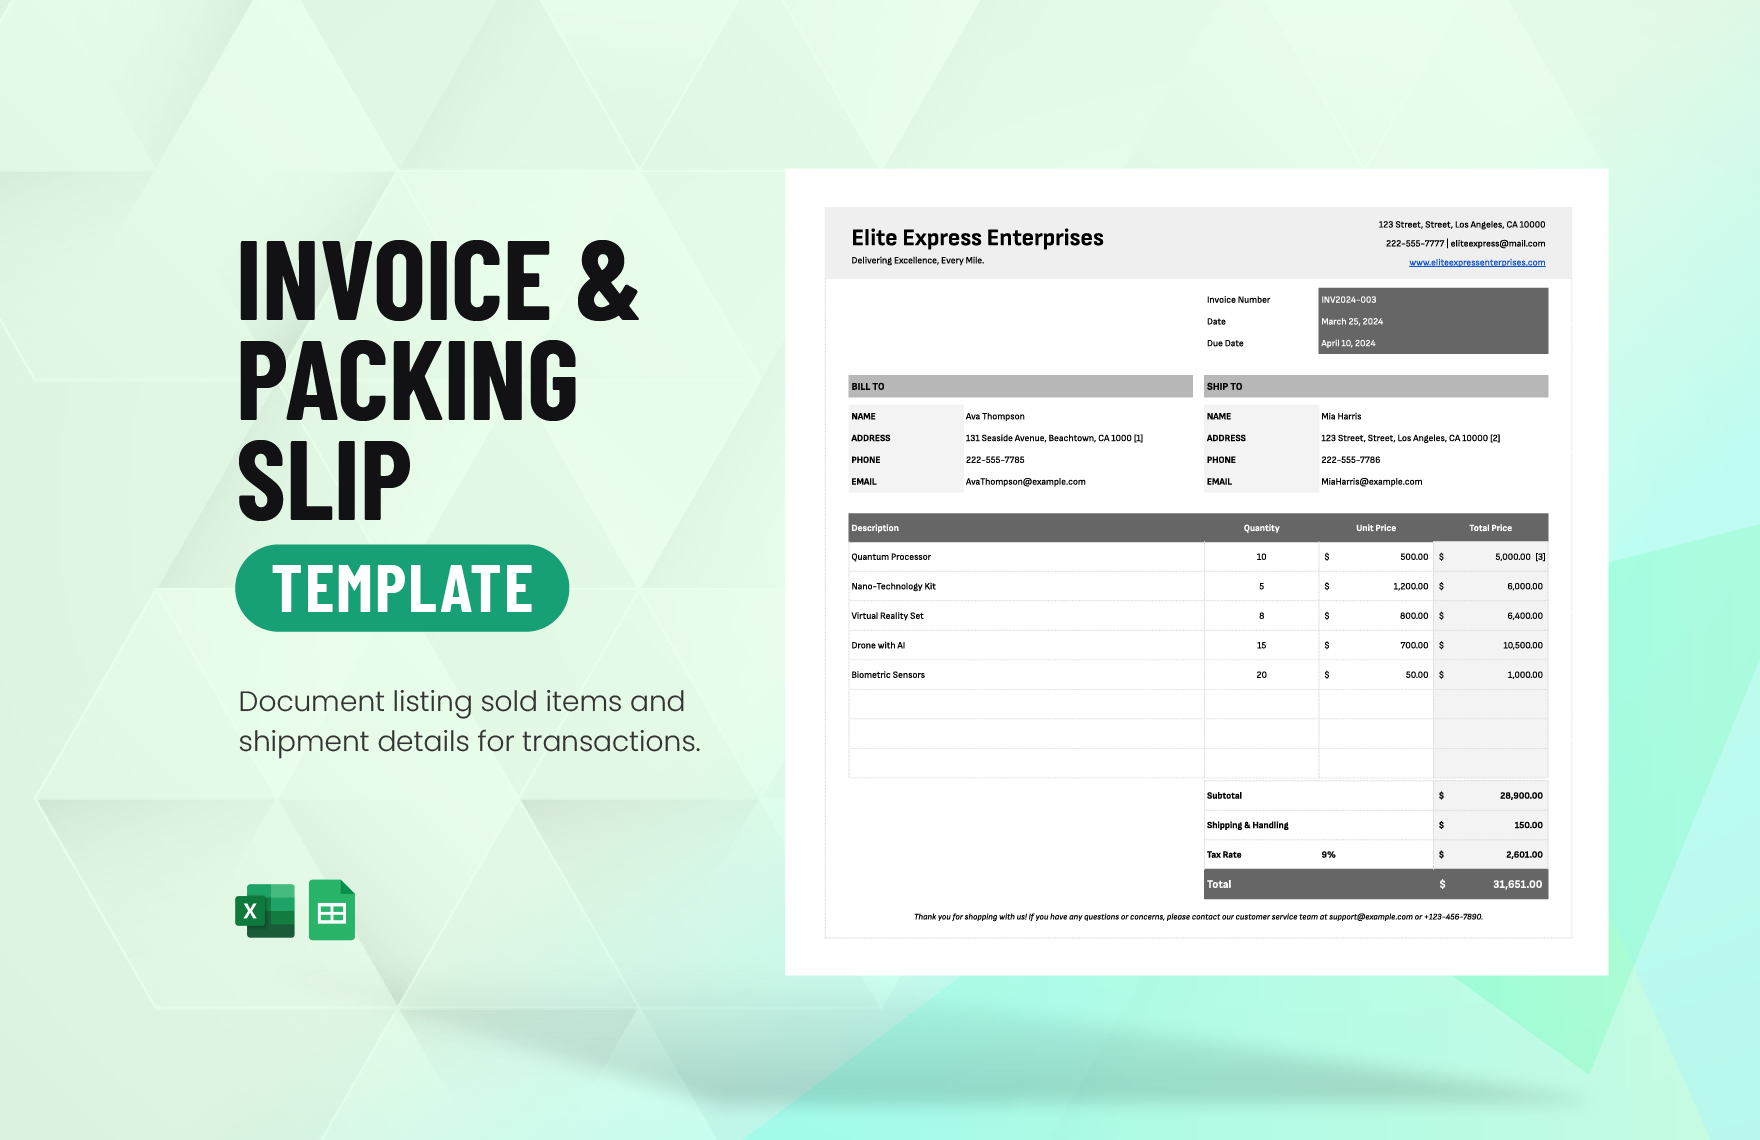 Invoice and Packing Slip Template